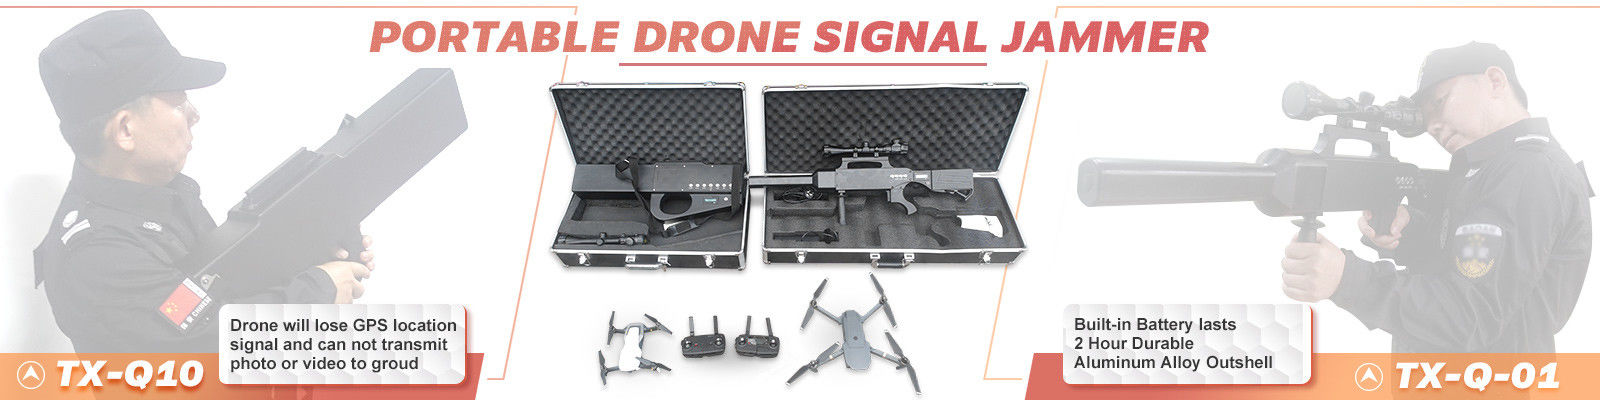 Drone Signal Jammer